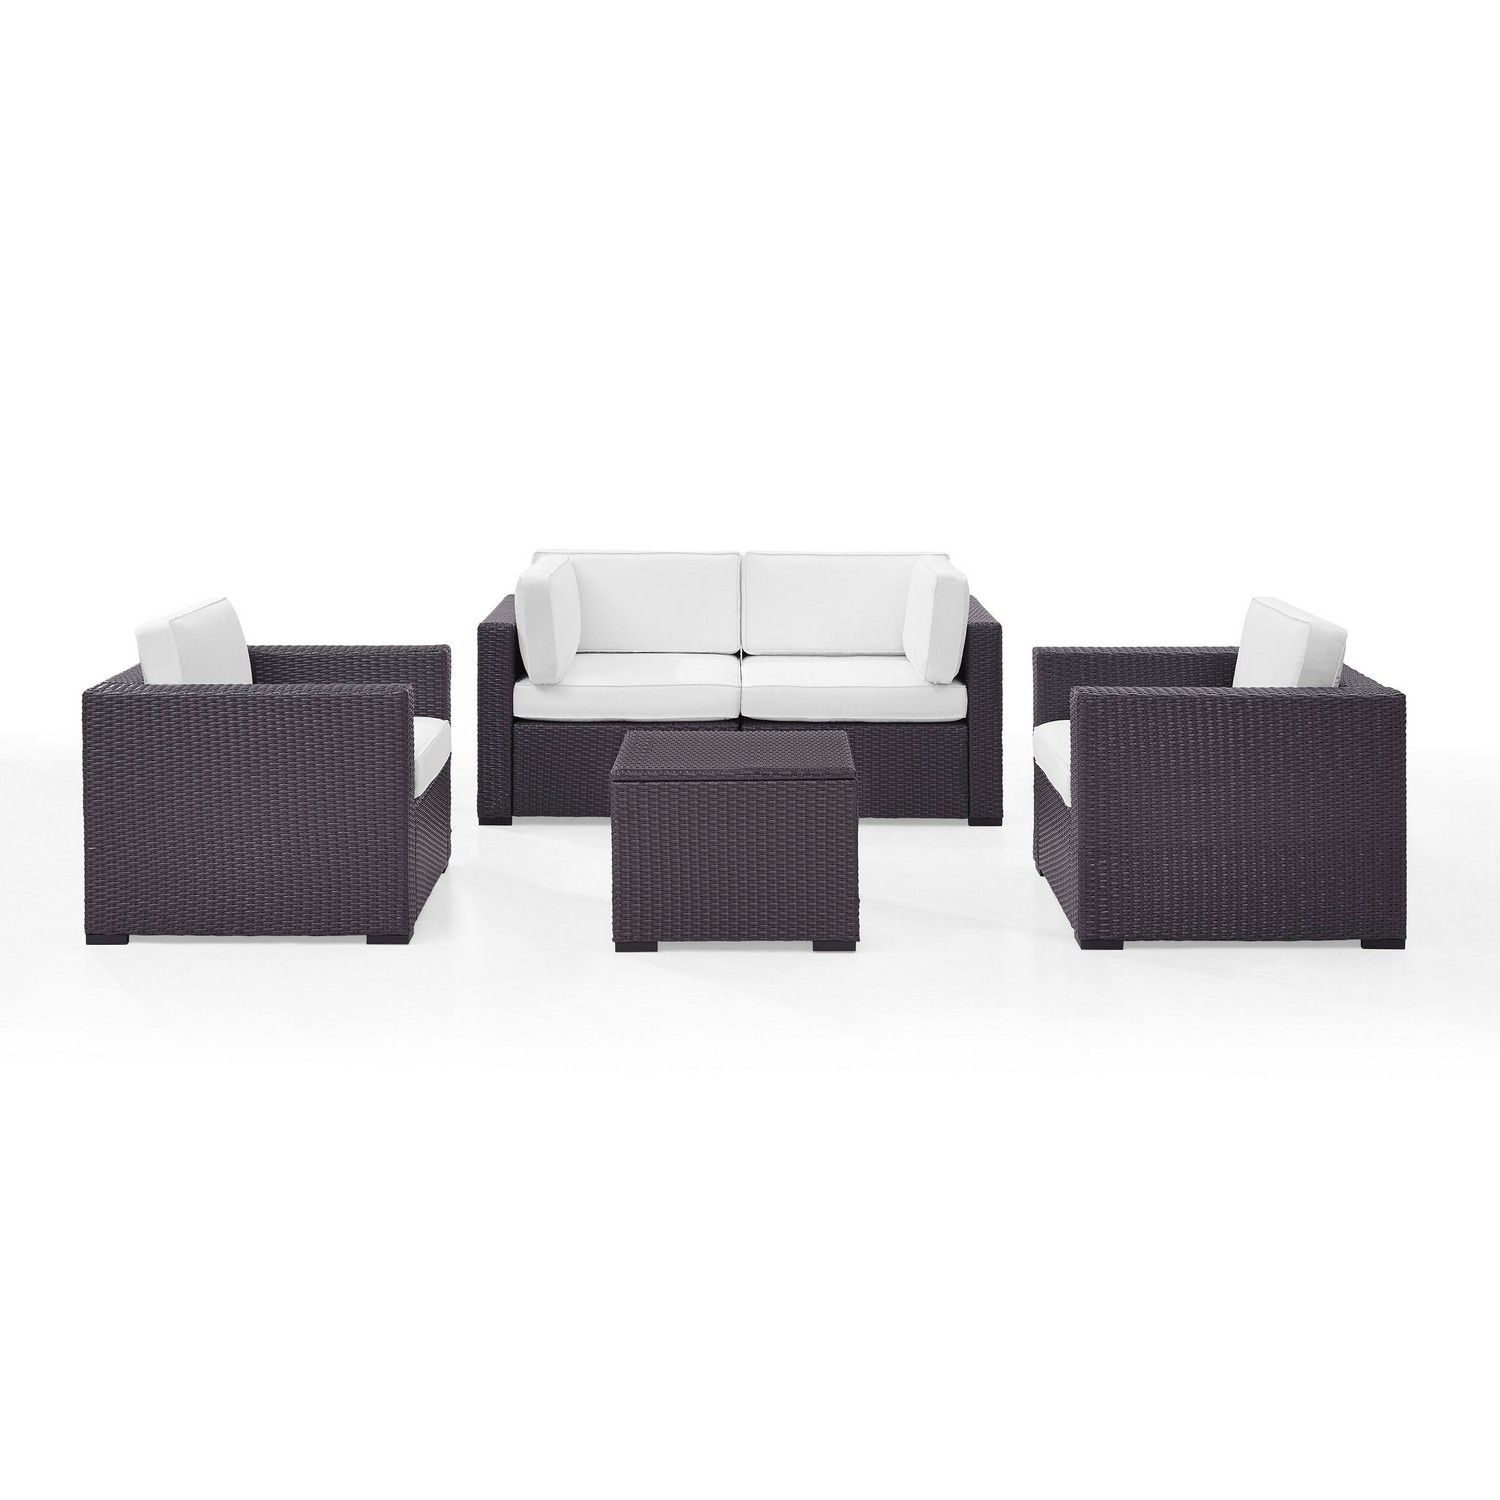 Crosley Biscayne 5-PC Outdoor Wicker Sectional Set - 2 Armchairs, 2 Corner Chair, Coffee Table - White/Brown